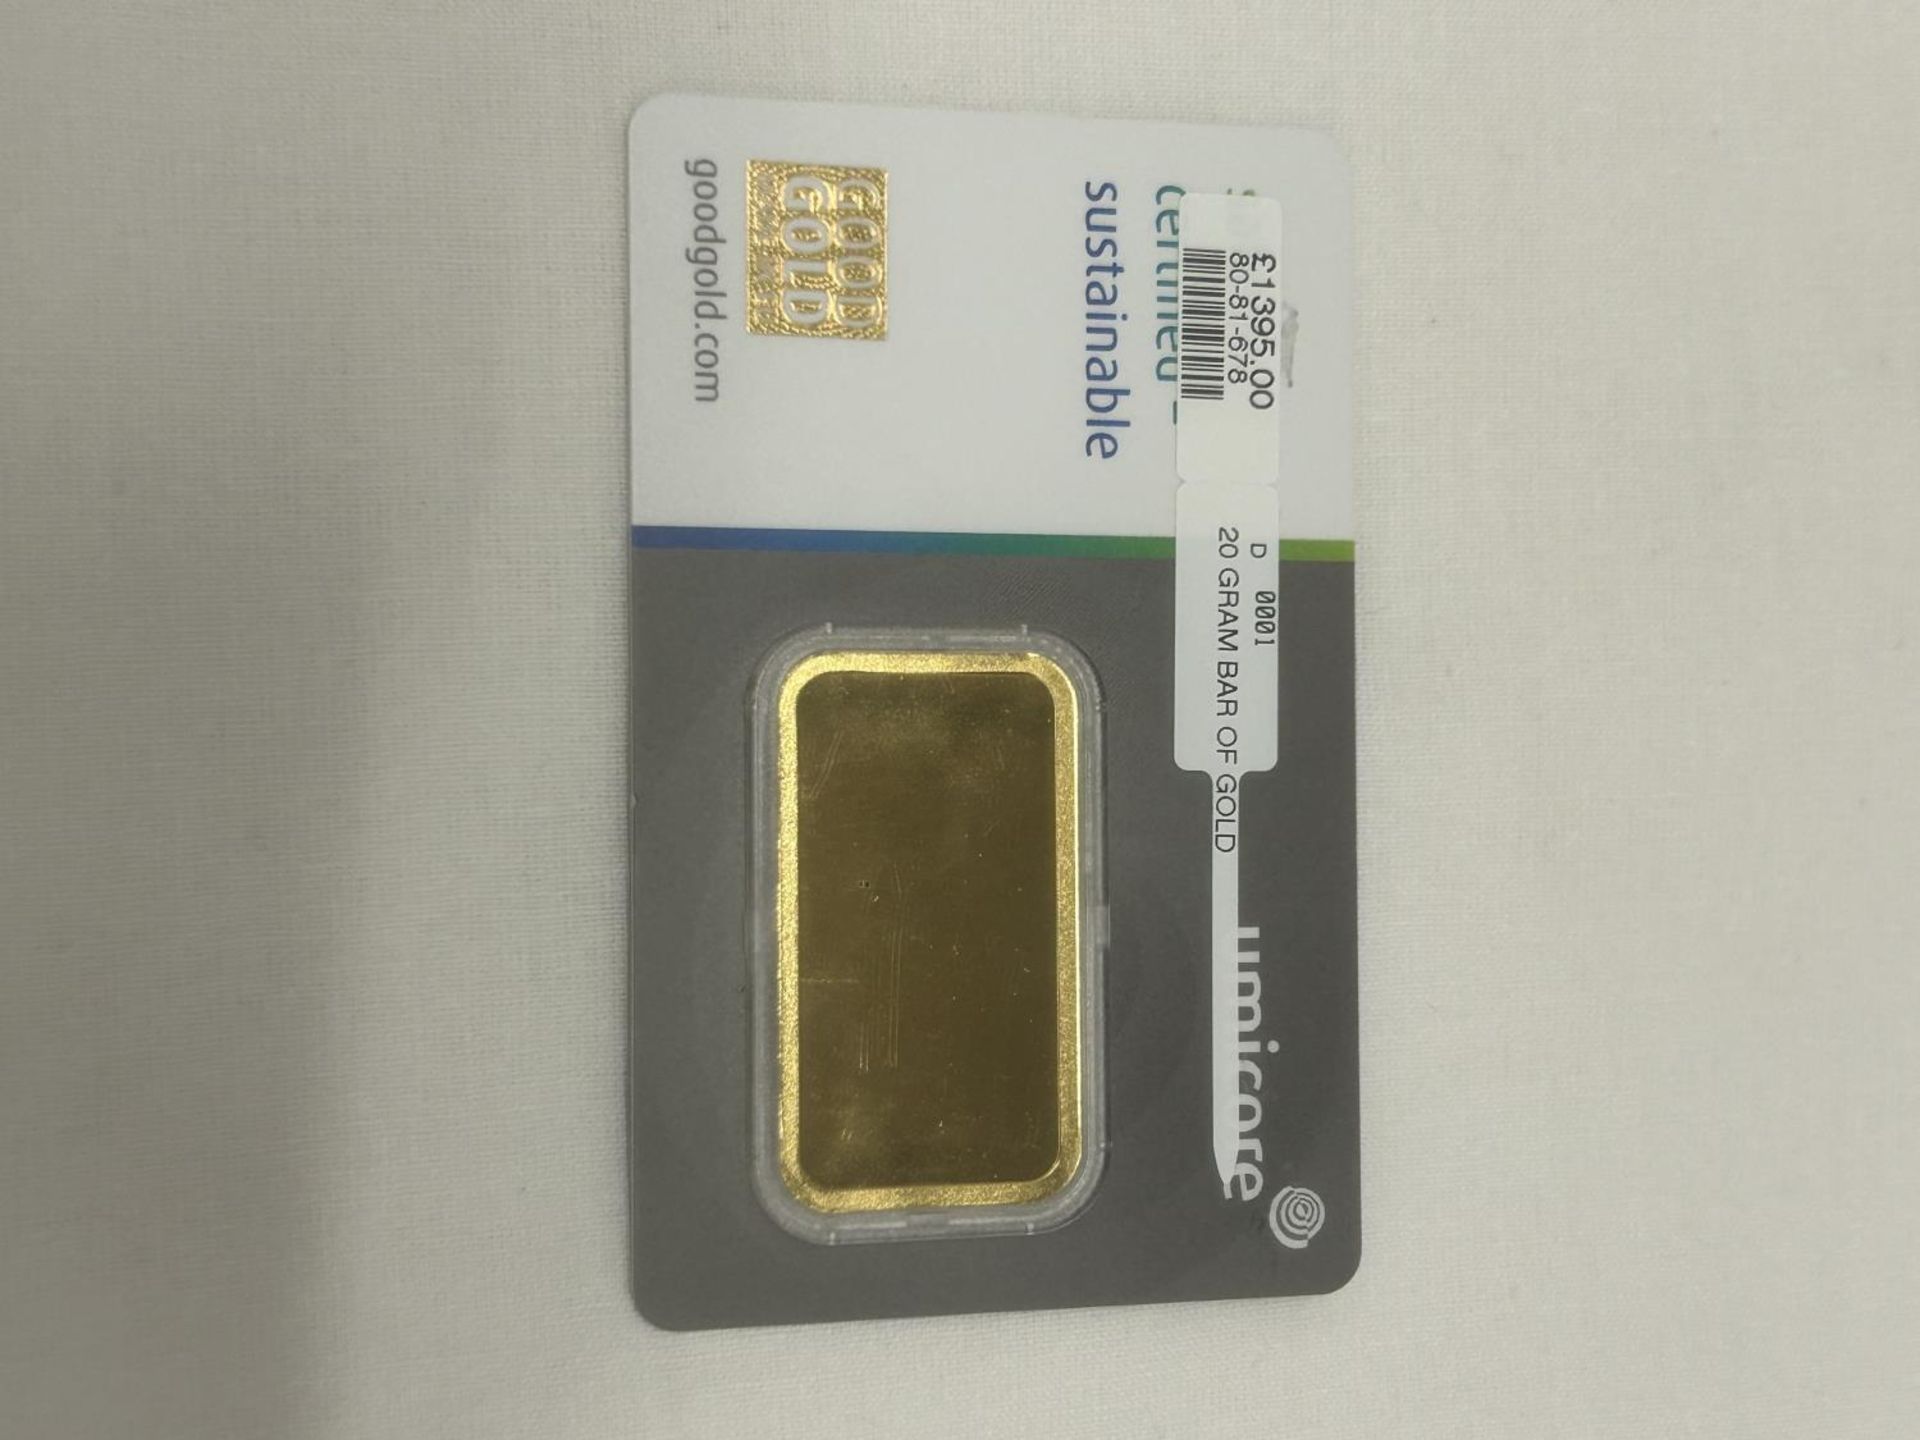 A 20G UMICORE FEINGOLD 999.9 GOLD BAR - Image 2 of 3